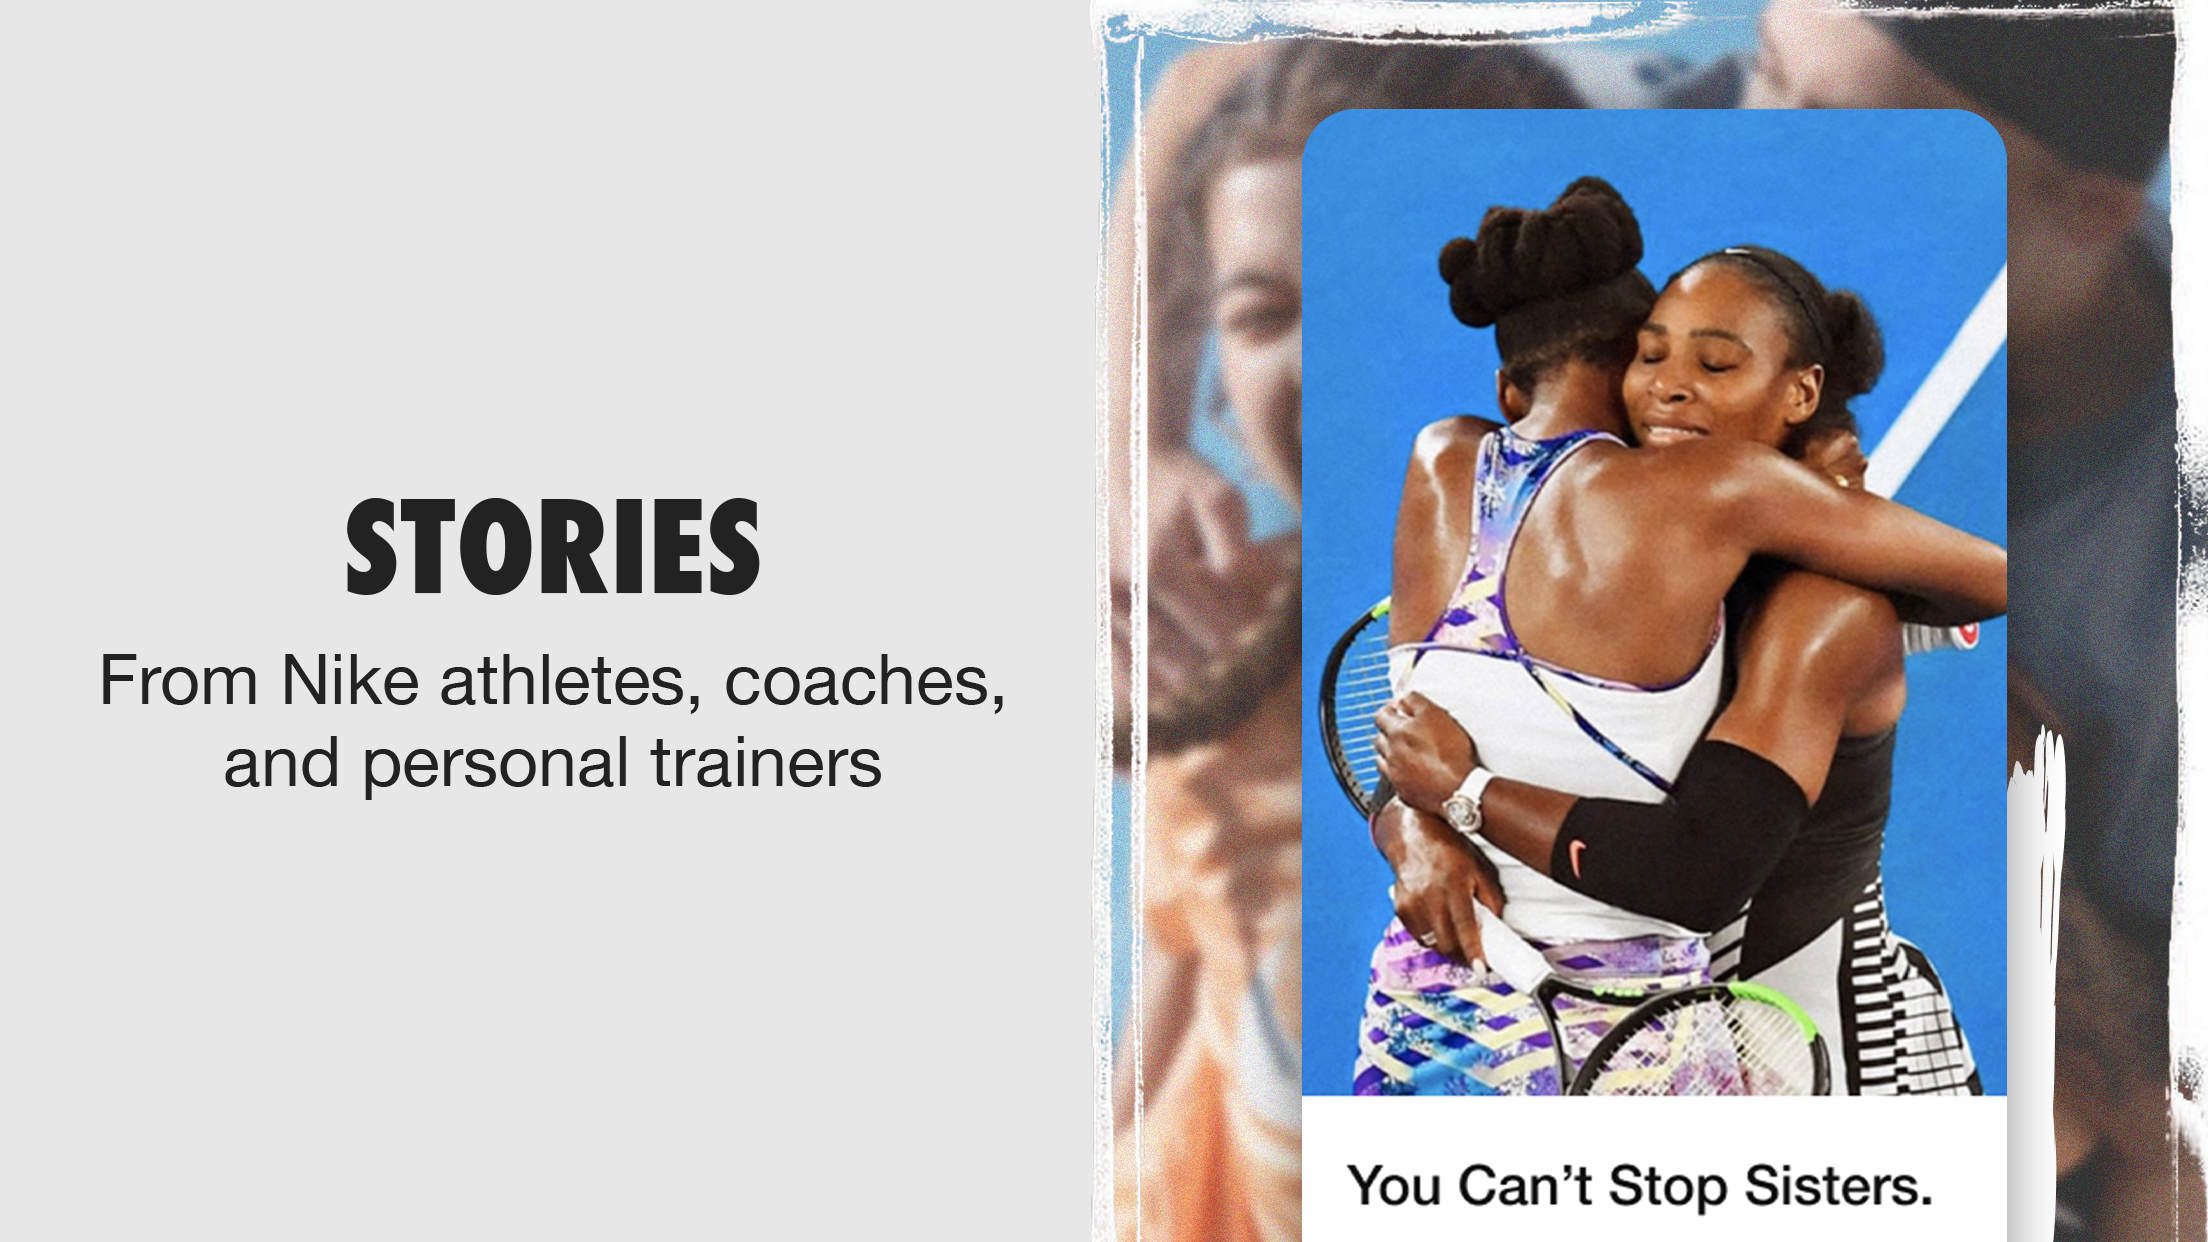 Nike: Shoes, Apparel & Stories APK 23.17.0 for Android – Download Nike:  Shoes, Apparel & Stories APK Latest Version from APKFab.com